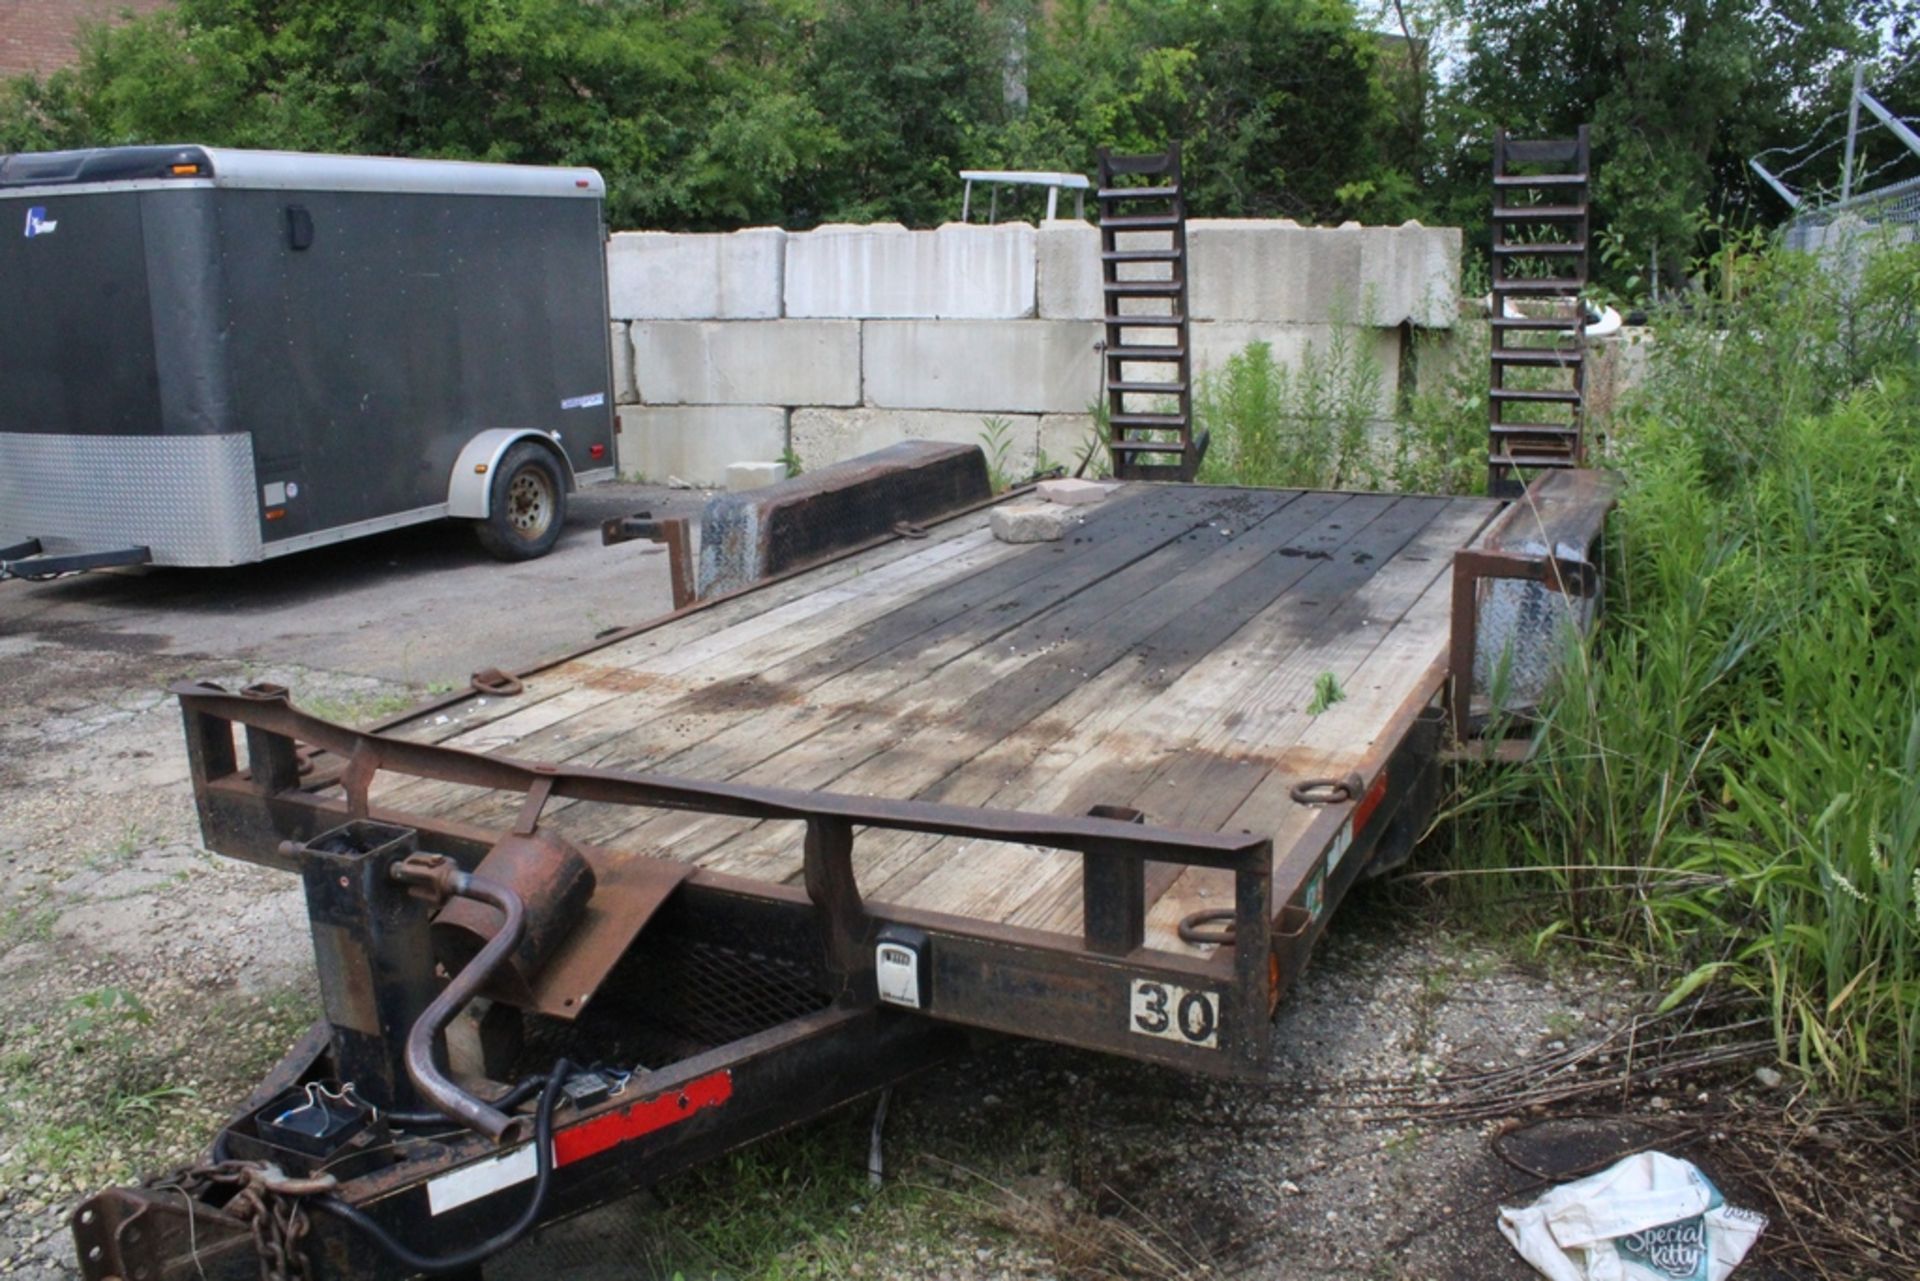 2005 Trailer, Wood Deck 13' X 7', Tandem Axle, With Bobtail Ramps, Vin 5Lvus18235S027524 - Image 5 of 5